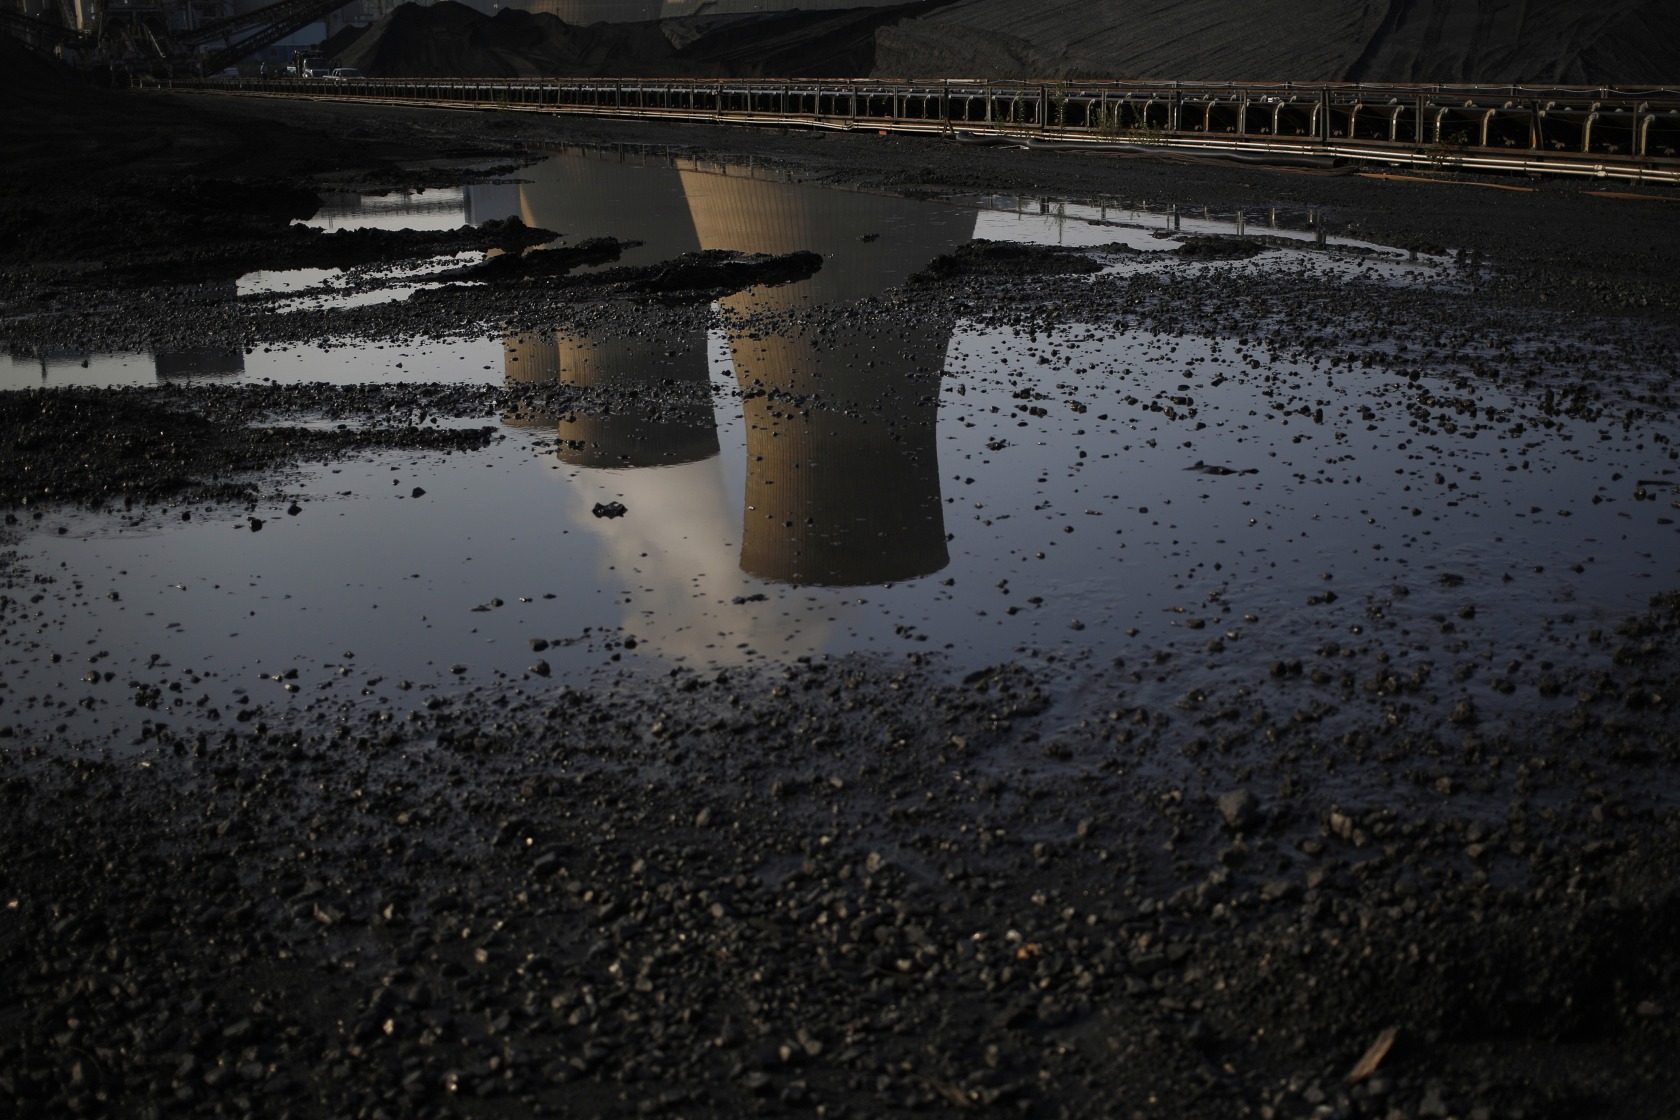 Cooling towers are reflected in a puddle at a coal-fired power plant&nbsp;in West Virginia.